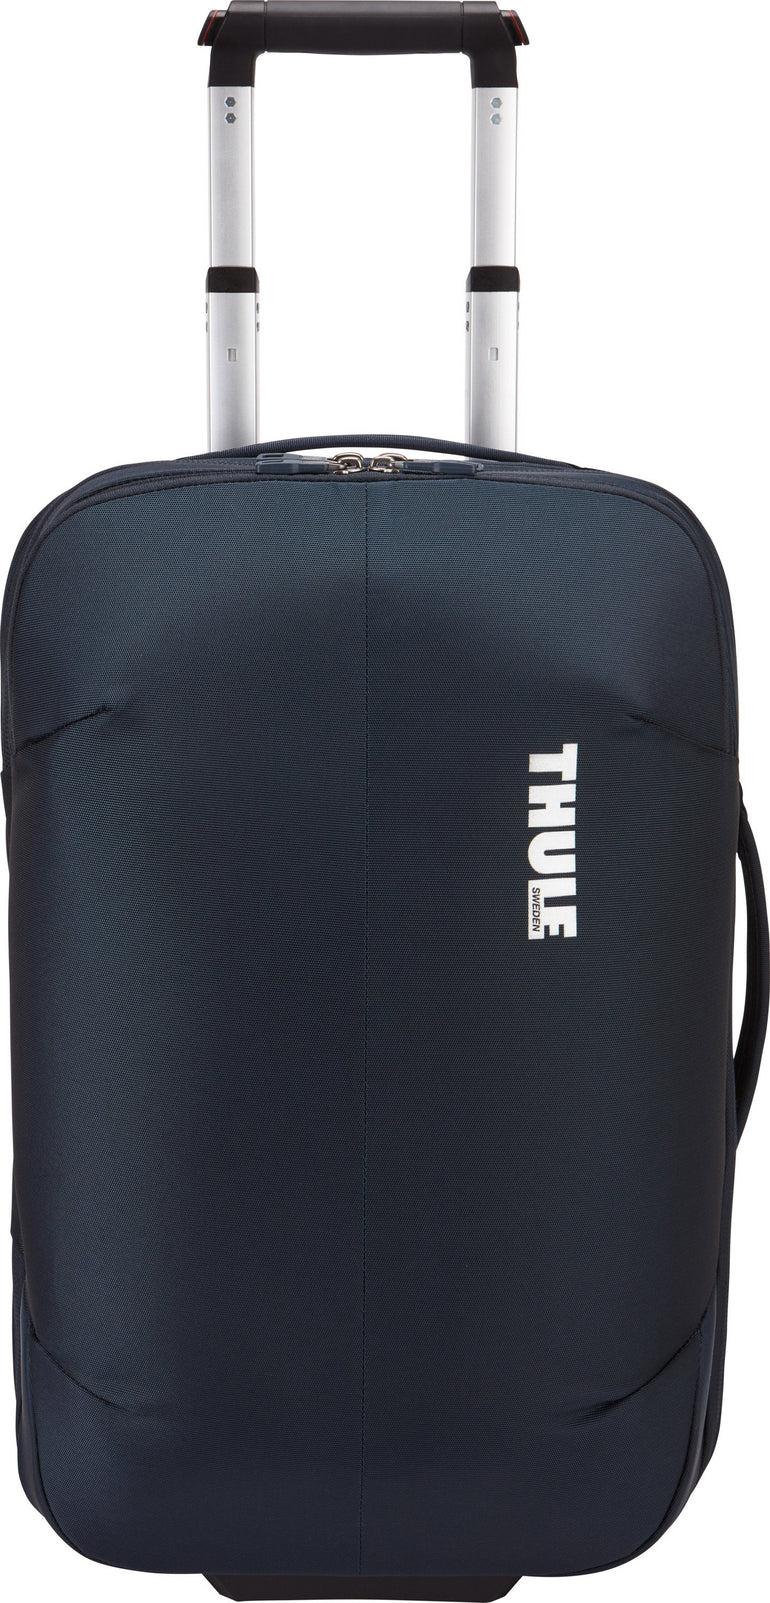 Thule Subterra 22 Inch Carry-On Luggage